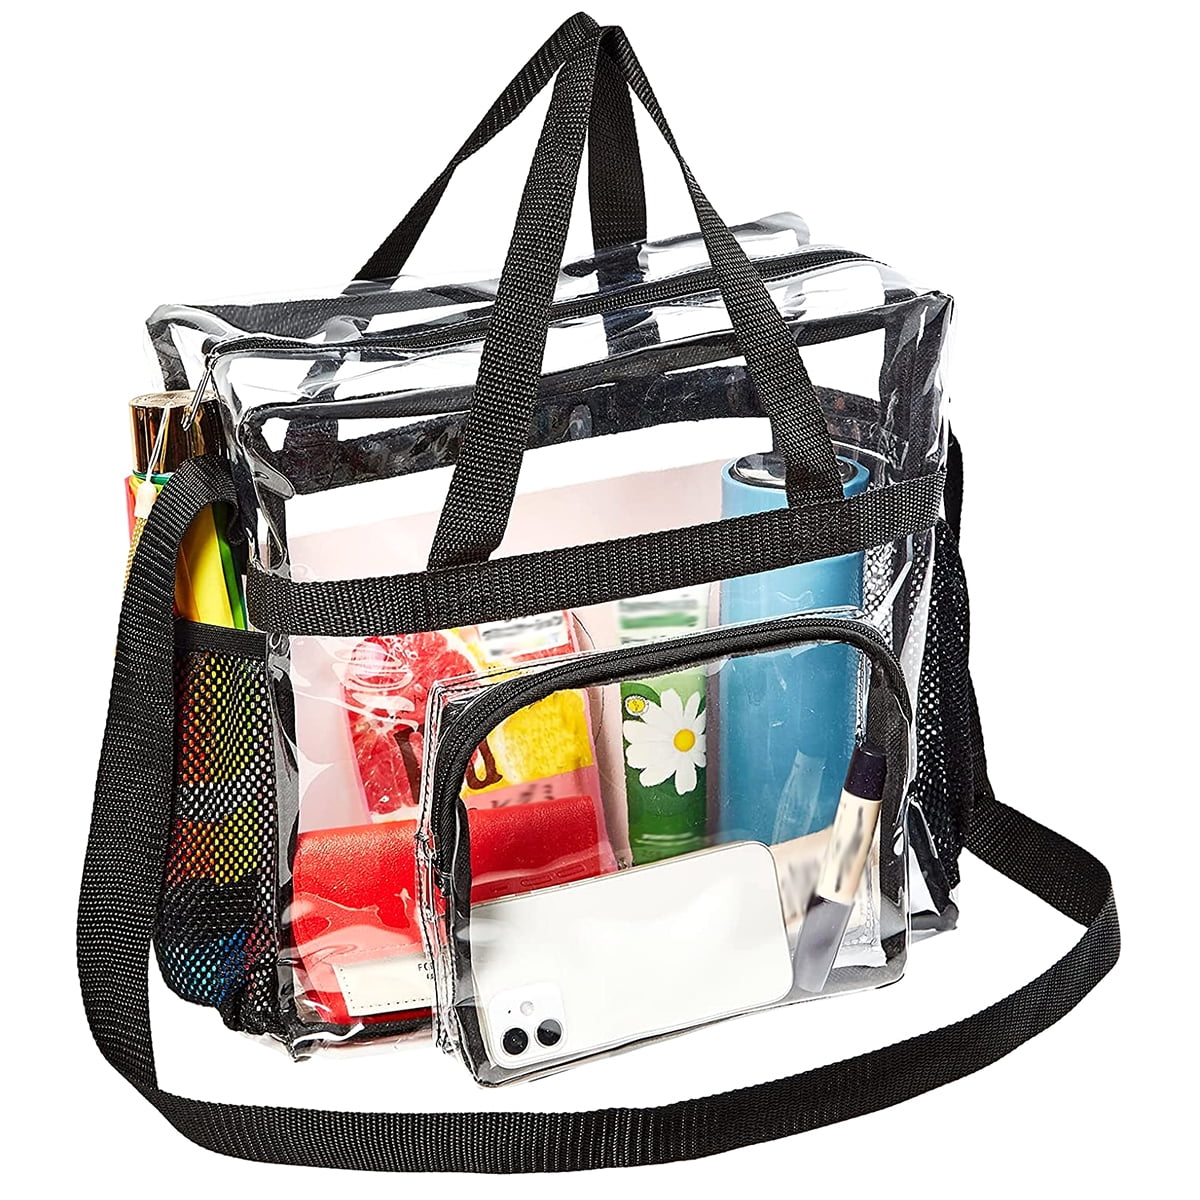 Large Clear Tote Bag, Fashion PVC Shoulder Handbag for Women, Clear Stadium Bag for Security Travel,Shopping,Sports and Work